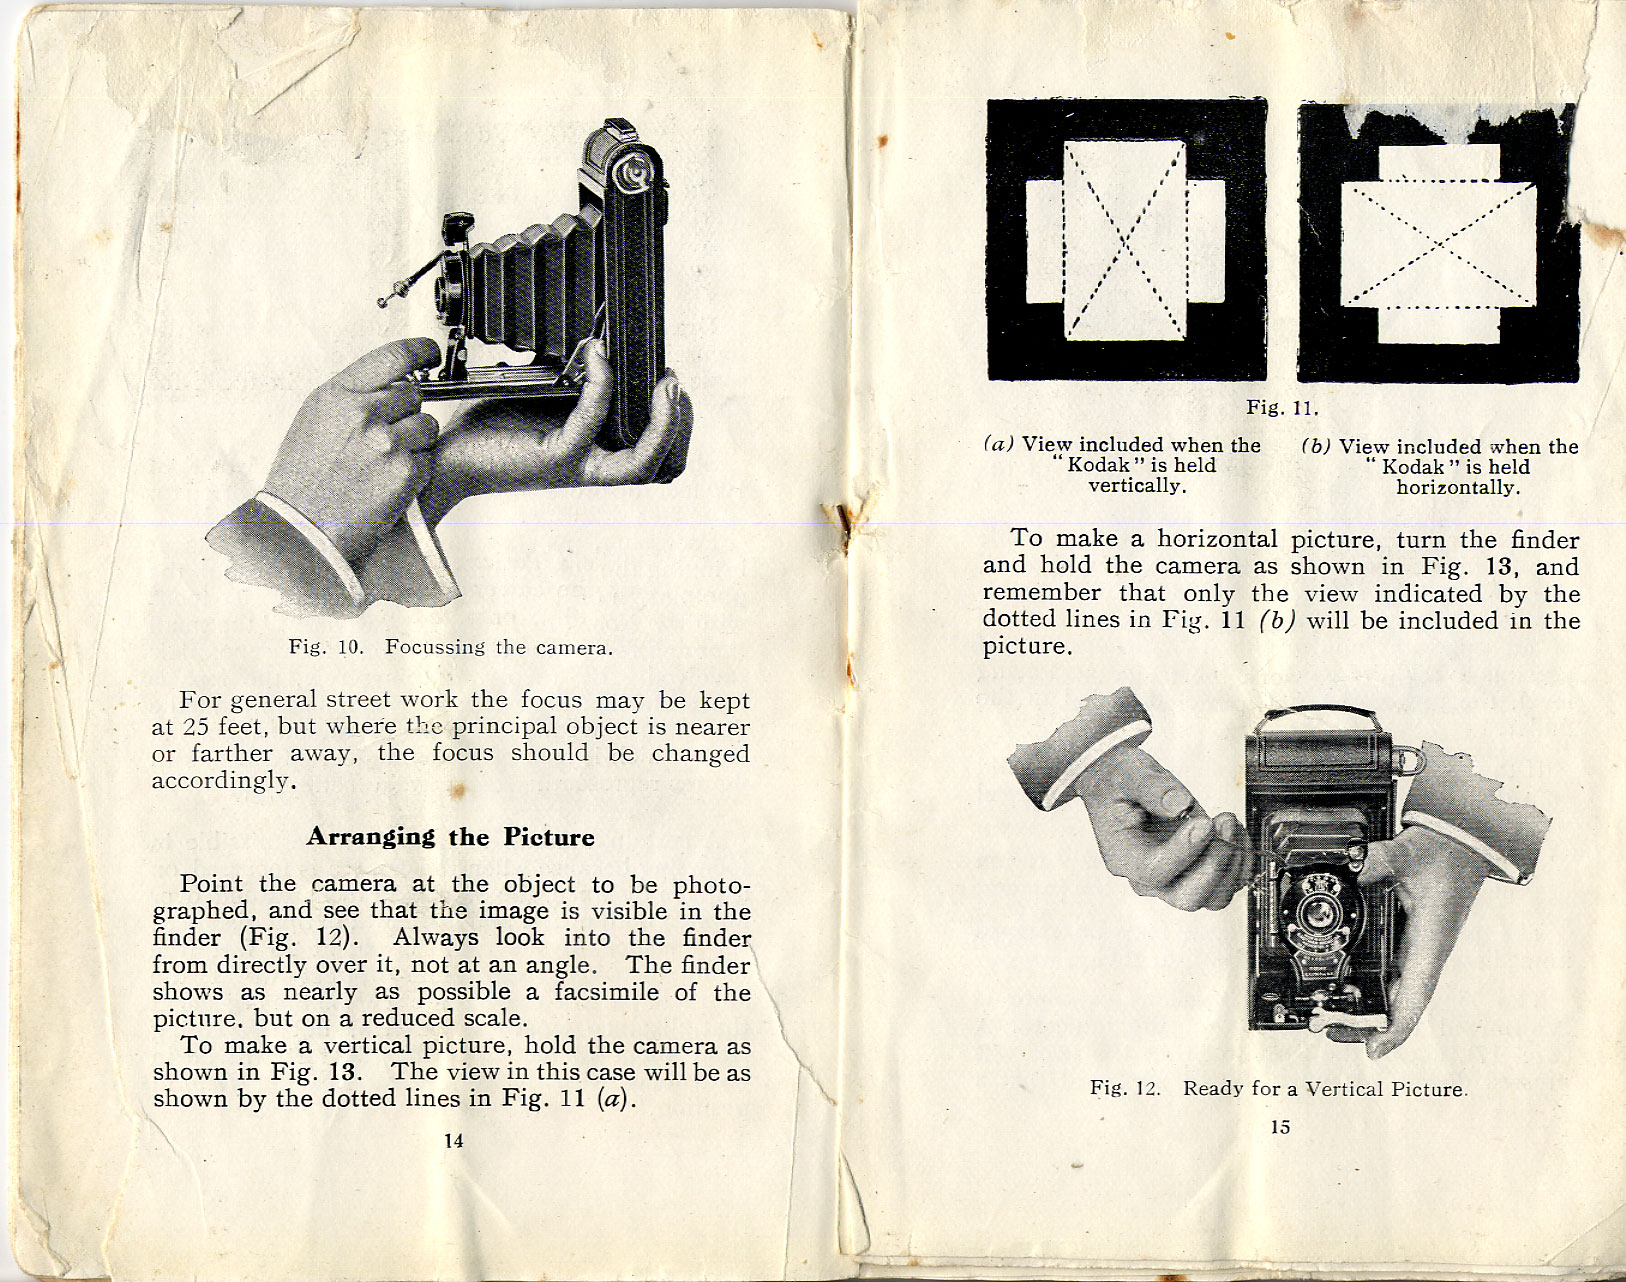 a manual for using a camera with no lens